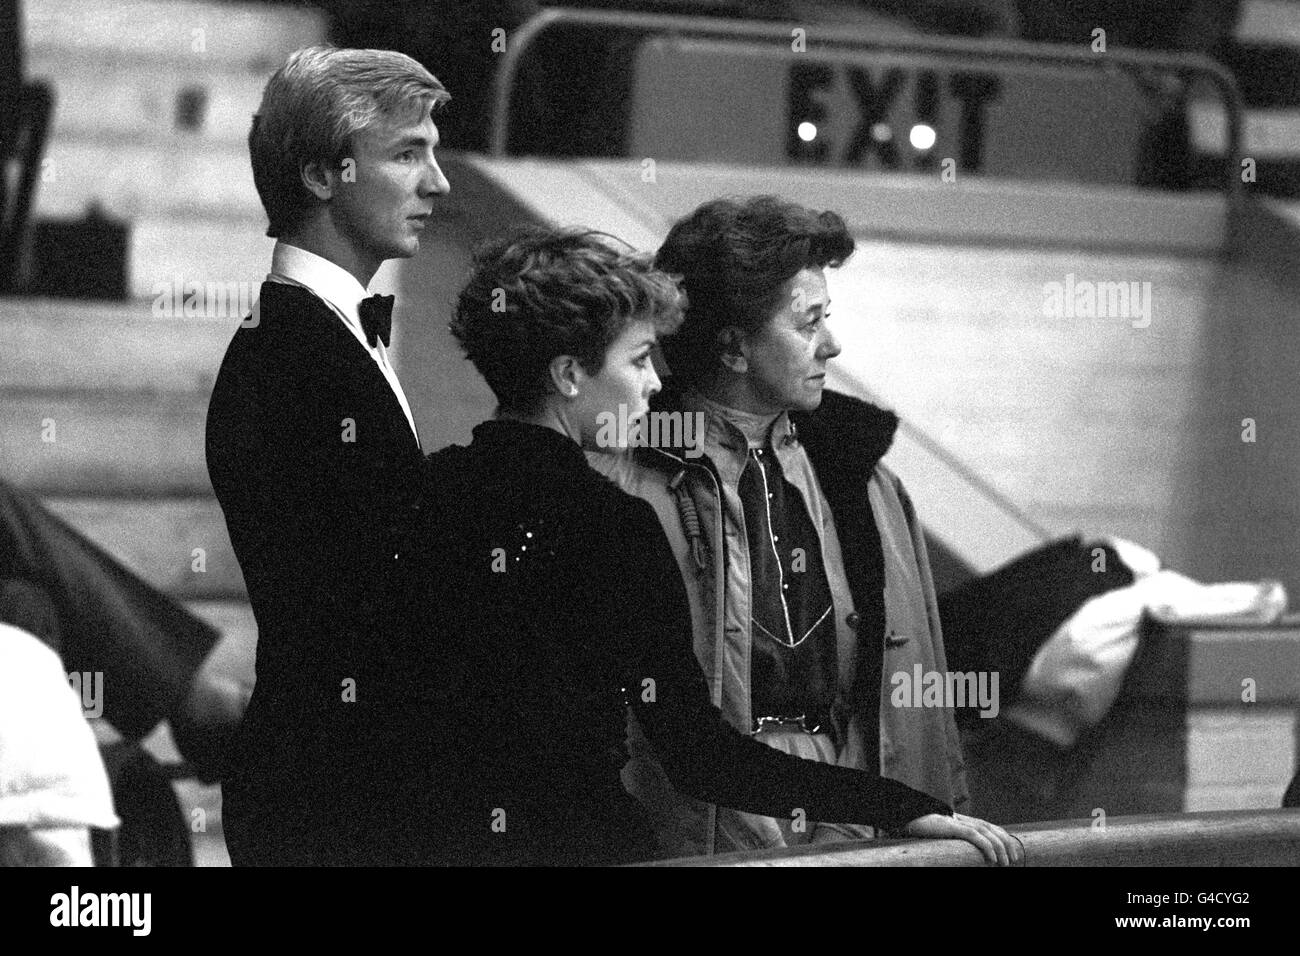 British Ice Dancers Christopher Dean (l) and partner Jayne Torvill (c) watch on with their coach Betty Callaway (r) as they win the Gold Medal in the European Figure Skating Championships Stock Photo